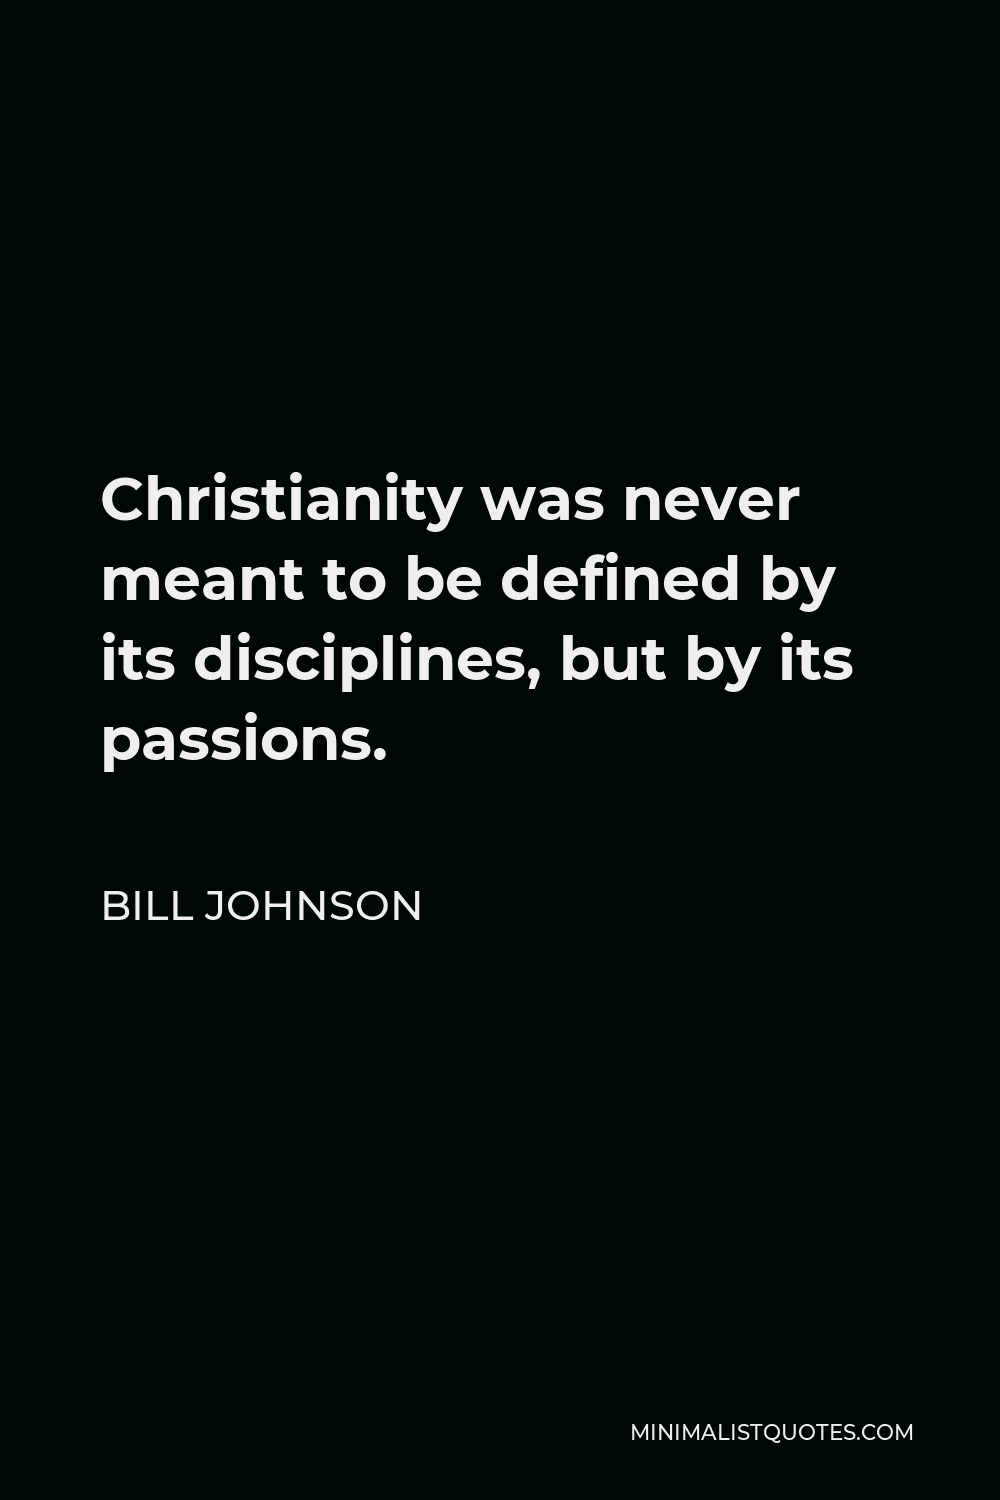 Bill Johnson Quote - Christianity was never meant to be defined by its disciplines, but by its passions.